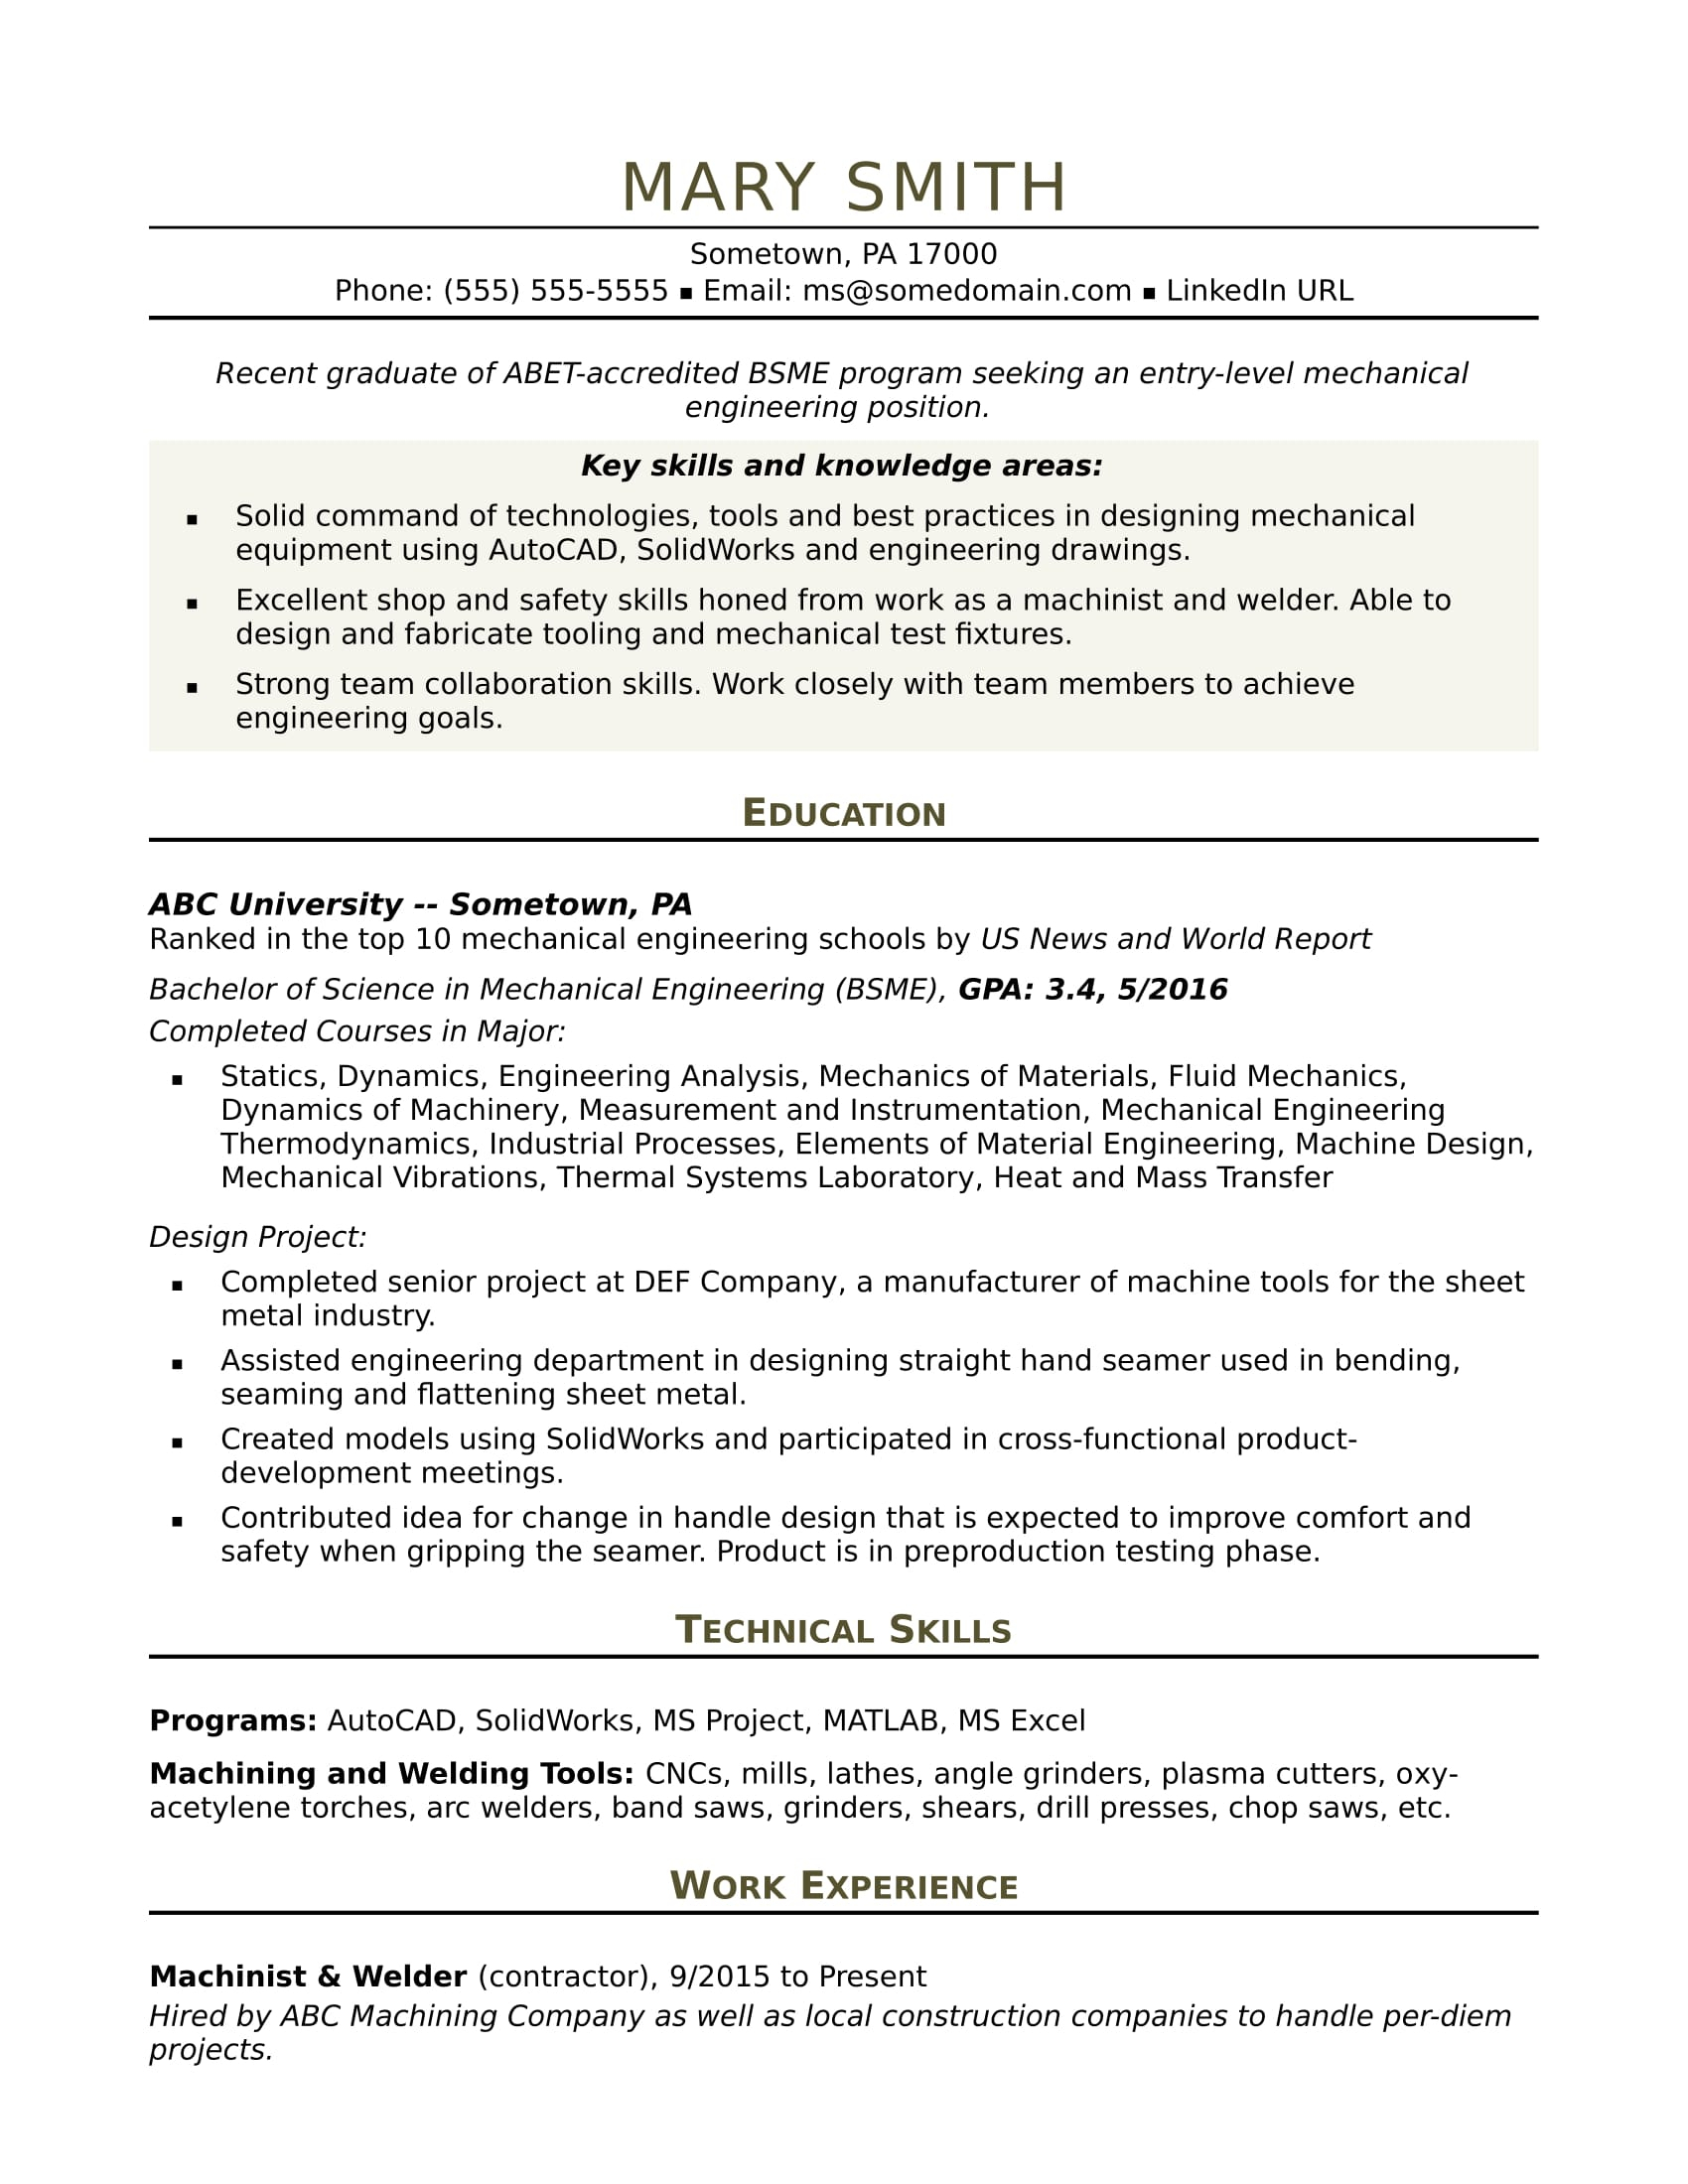 Sample Resume For An Entry Level Mechanical Engineer Pertaining To Mechanic Job Card Template